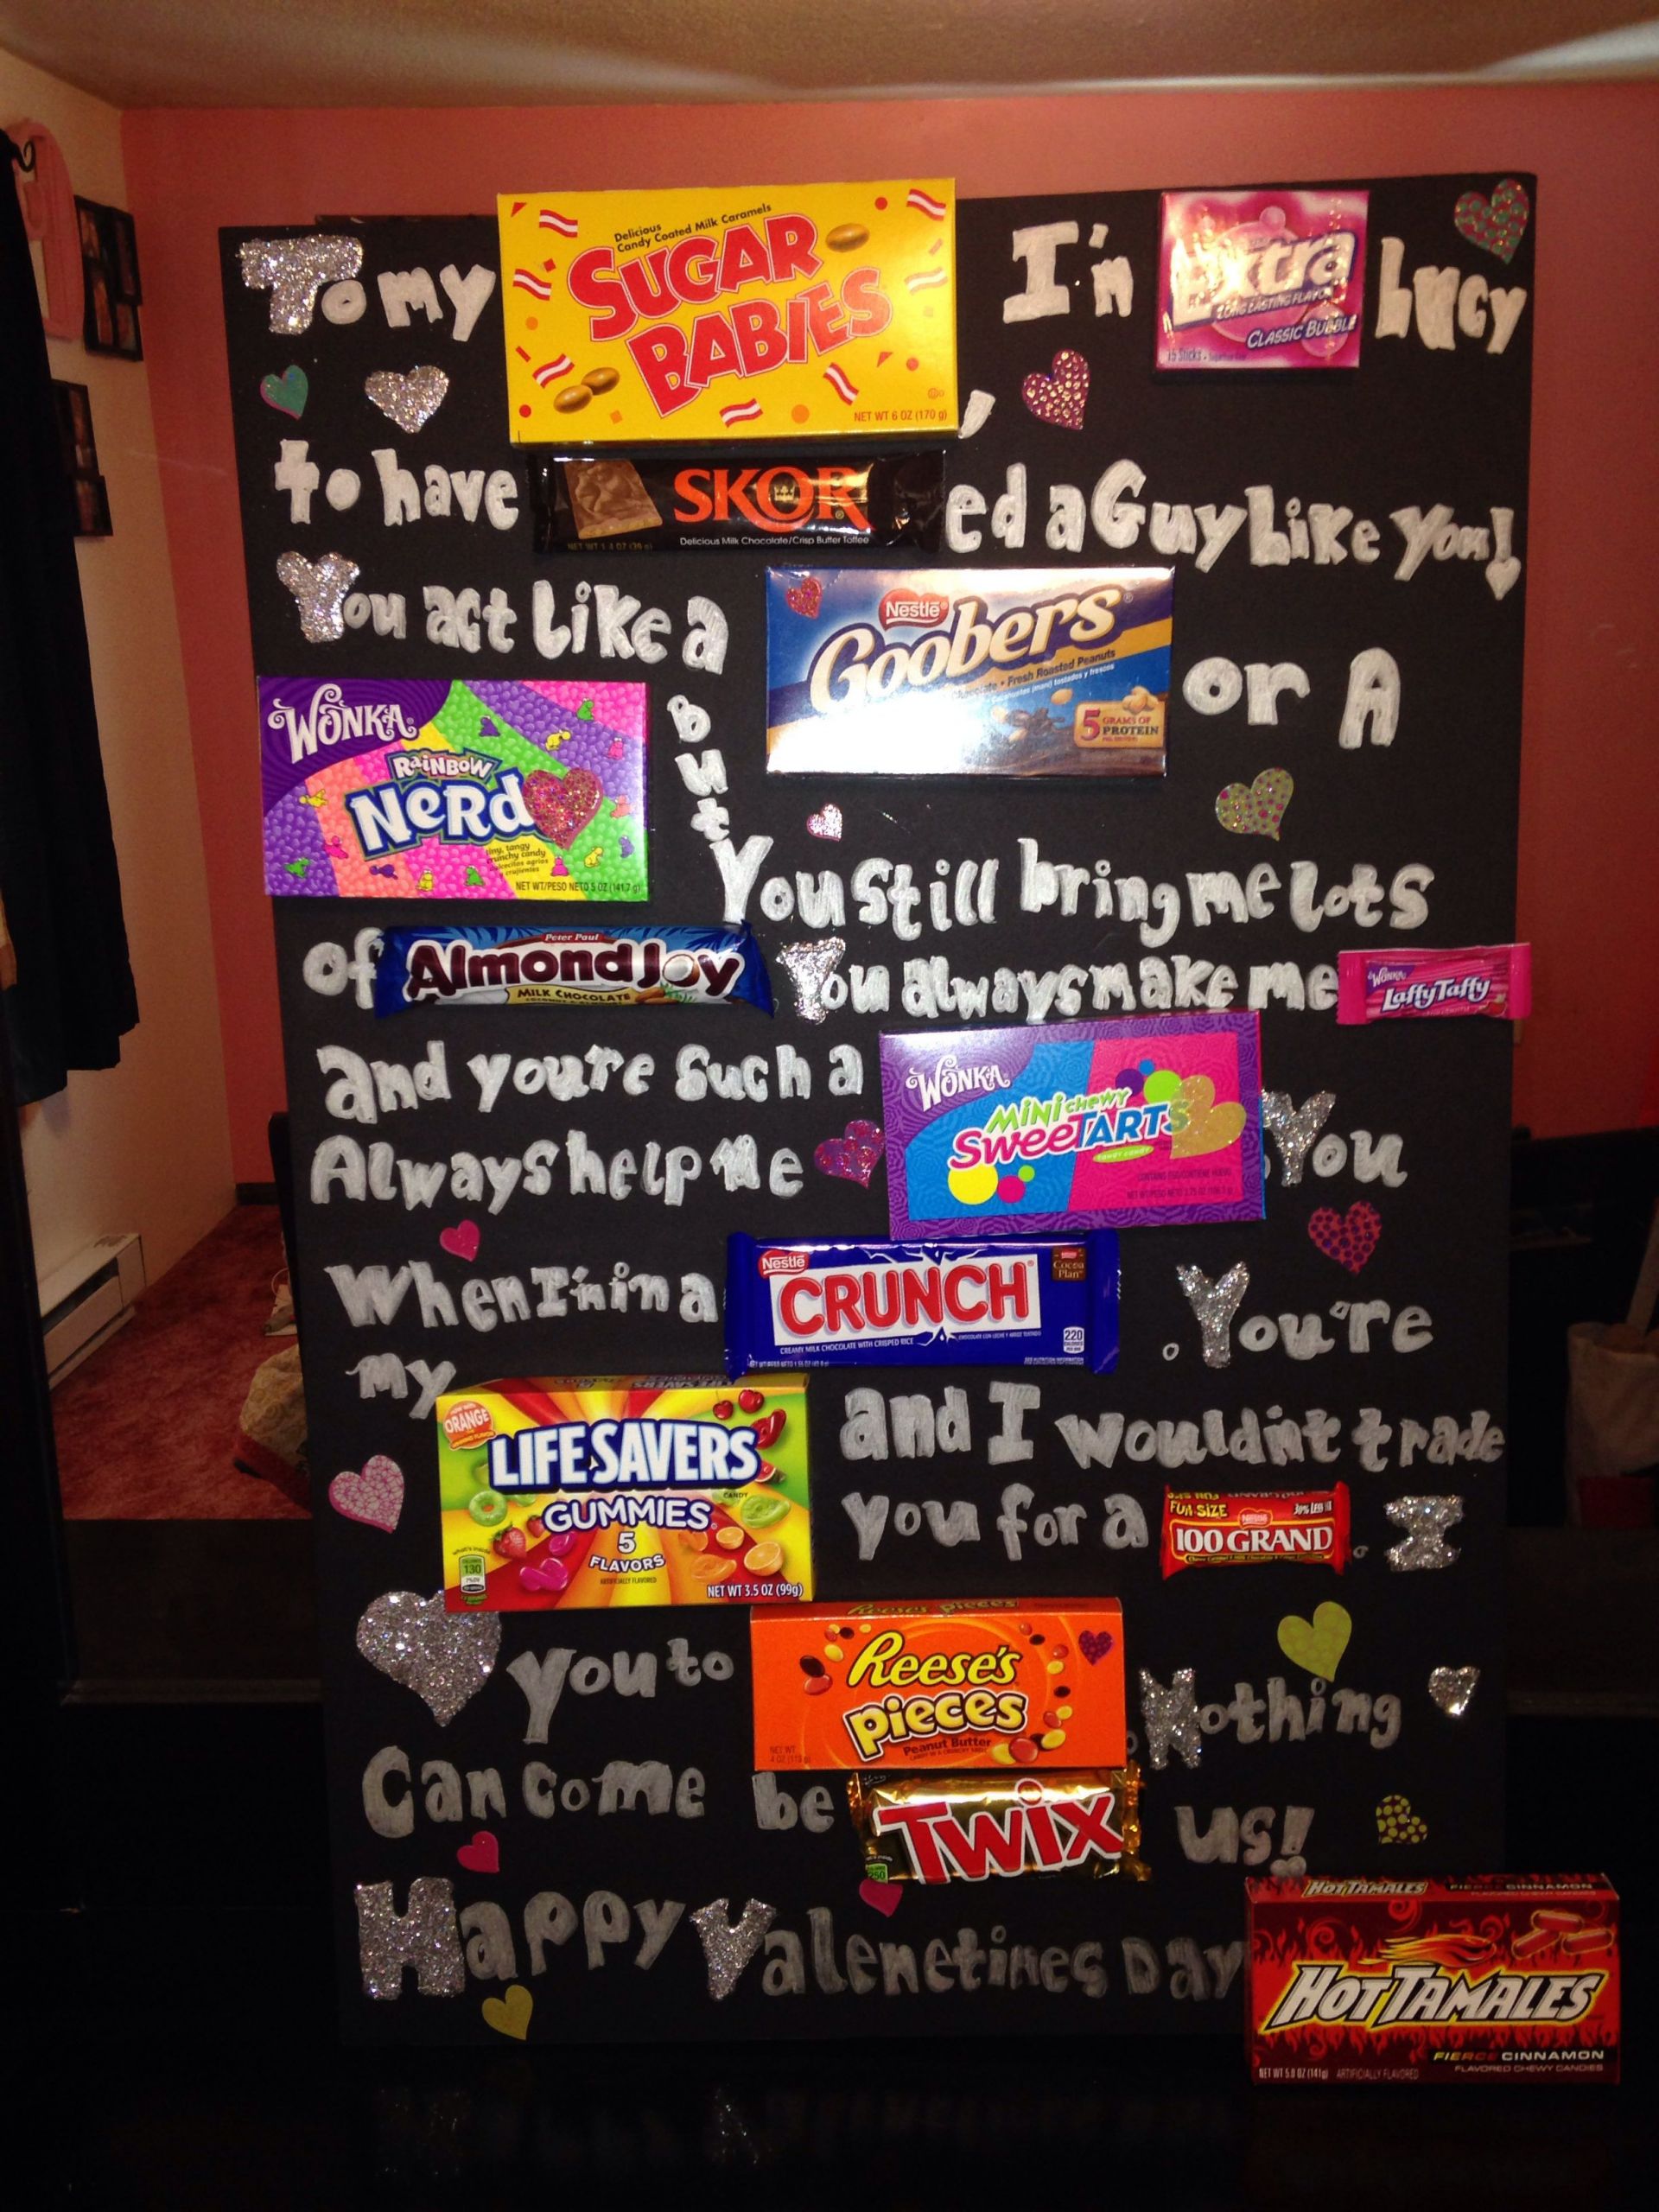 Valentines Day Candy Poster
 Valentines day candy board for your boyfriend